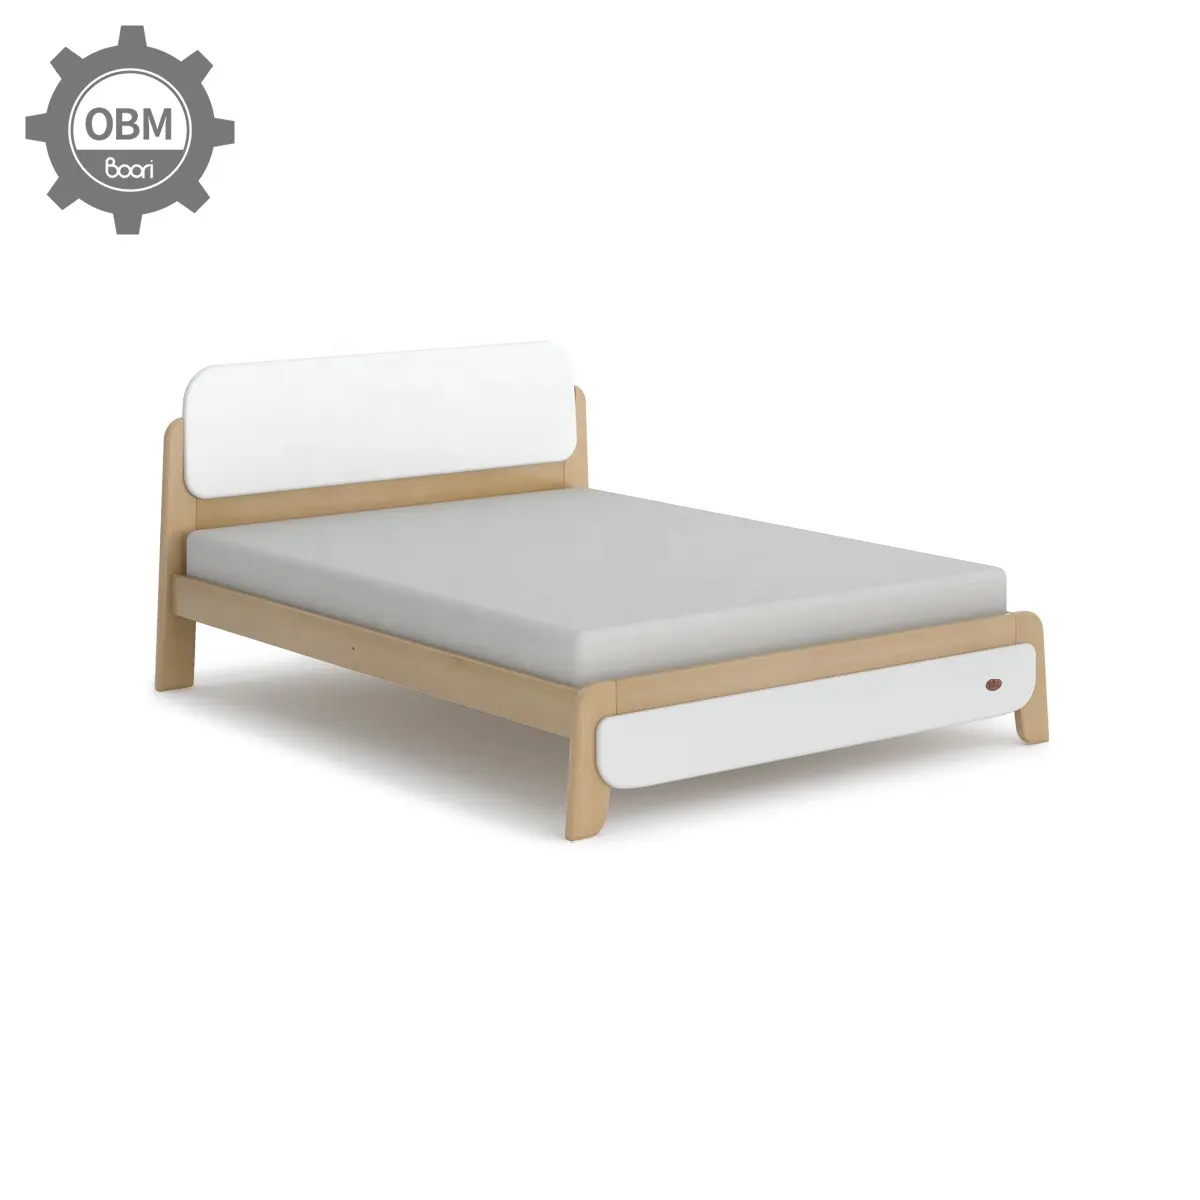 Bed Child Bed Only B2B Queen Bed Sleep OBM Manufacturer Pine Wood White Brown Children Beds Wood Bedroom Furniture